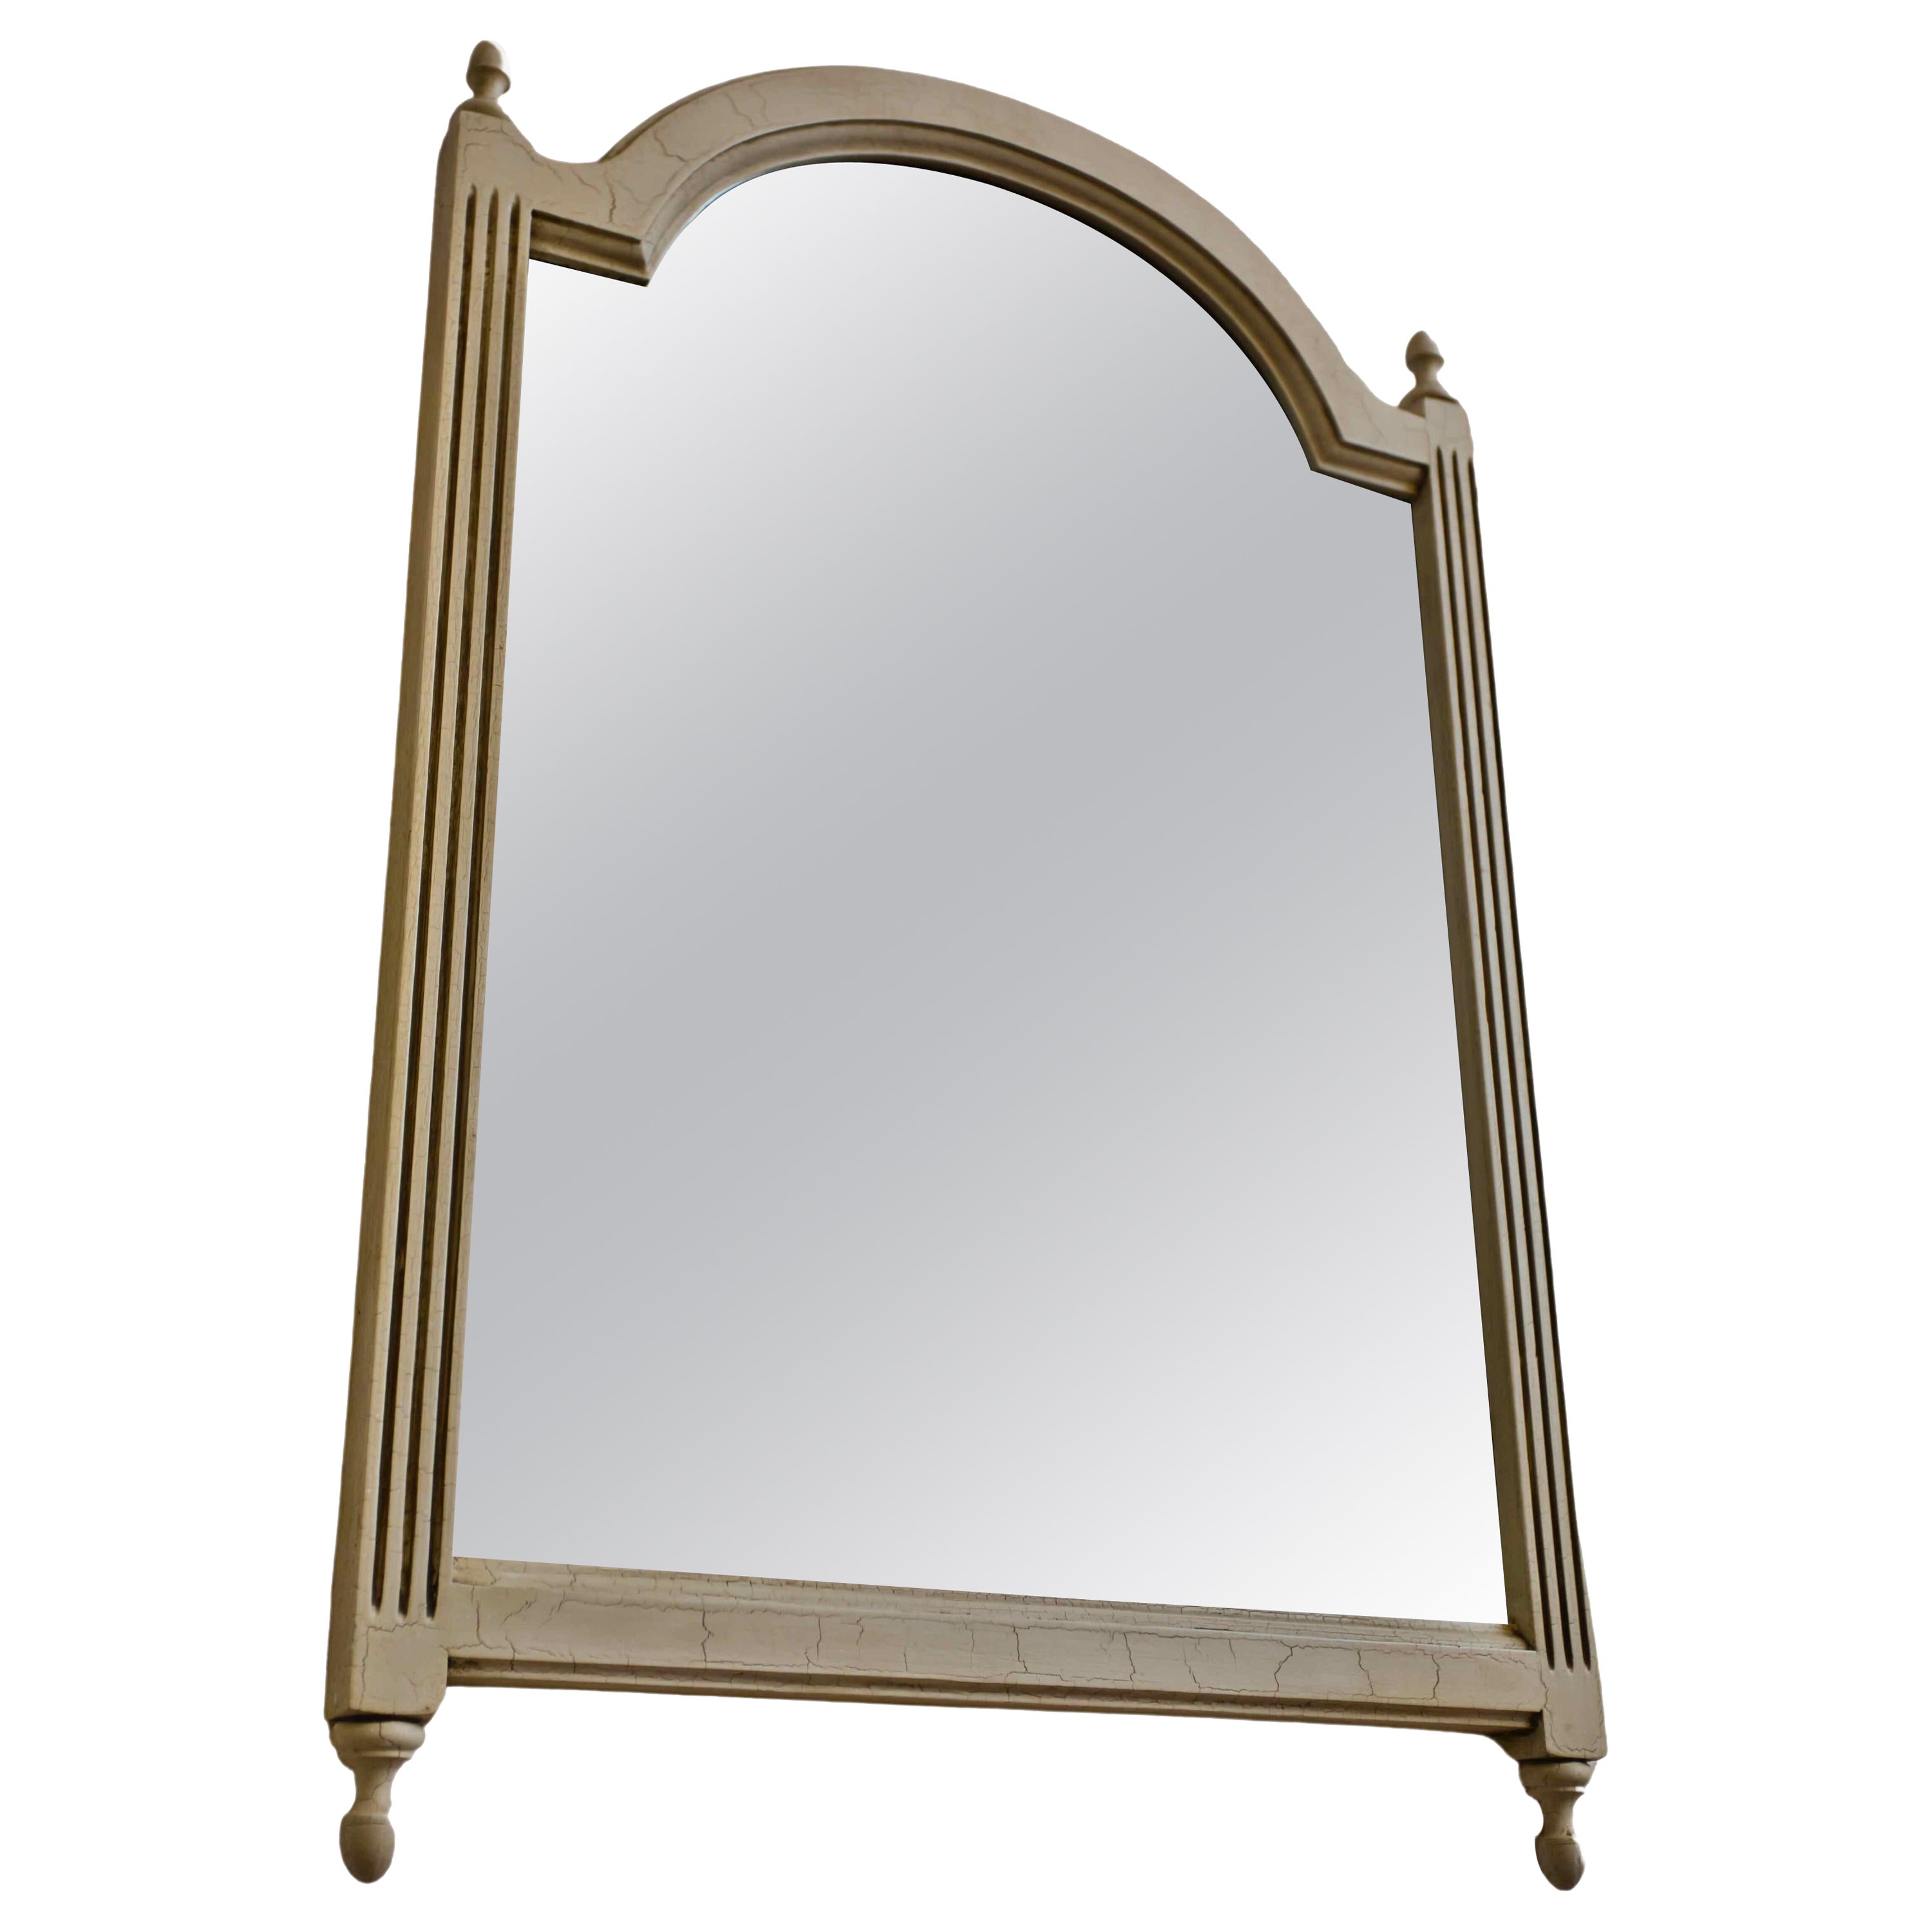 White mirror decorated with crackle